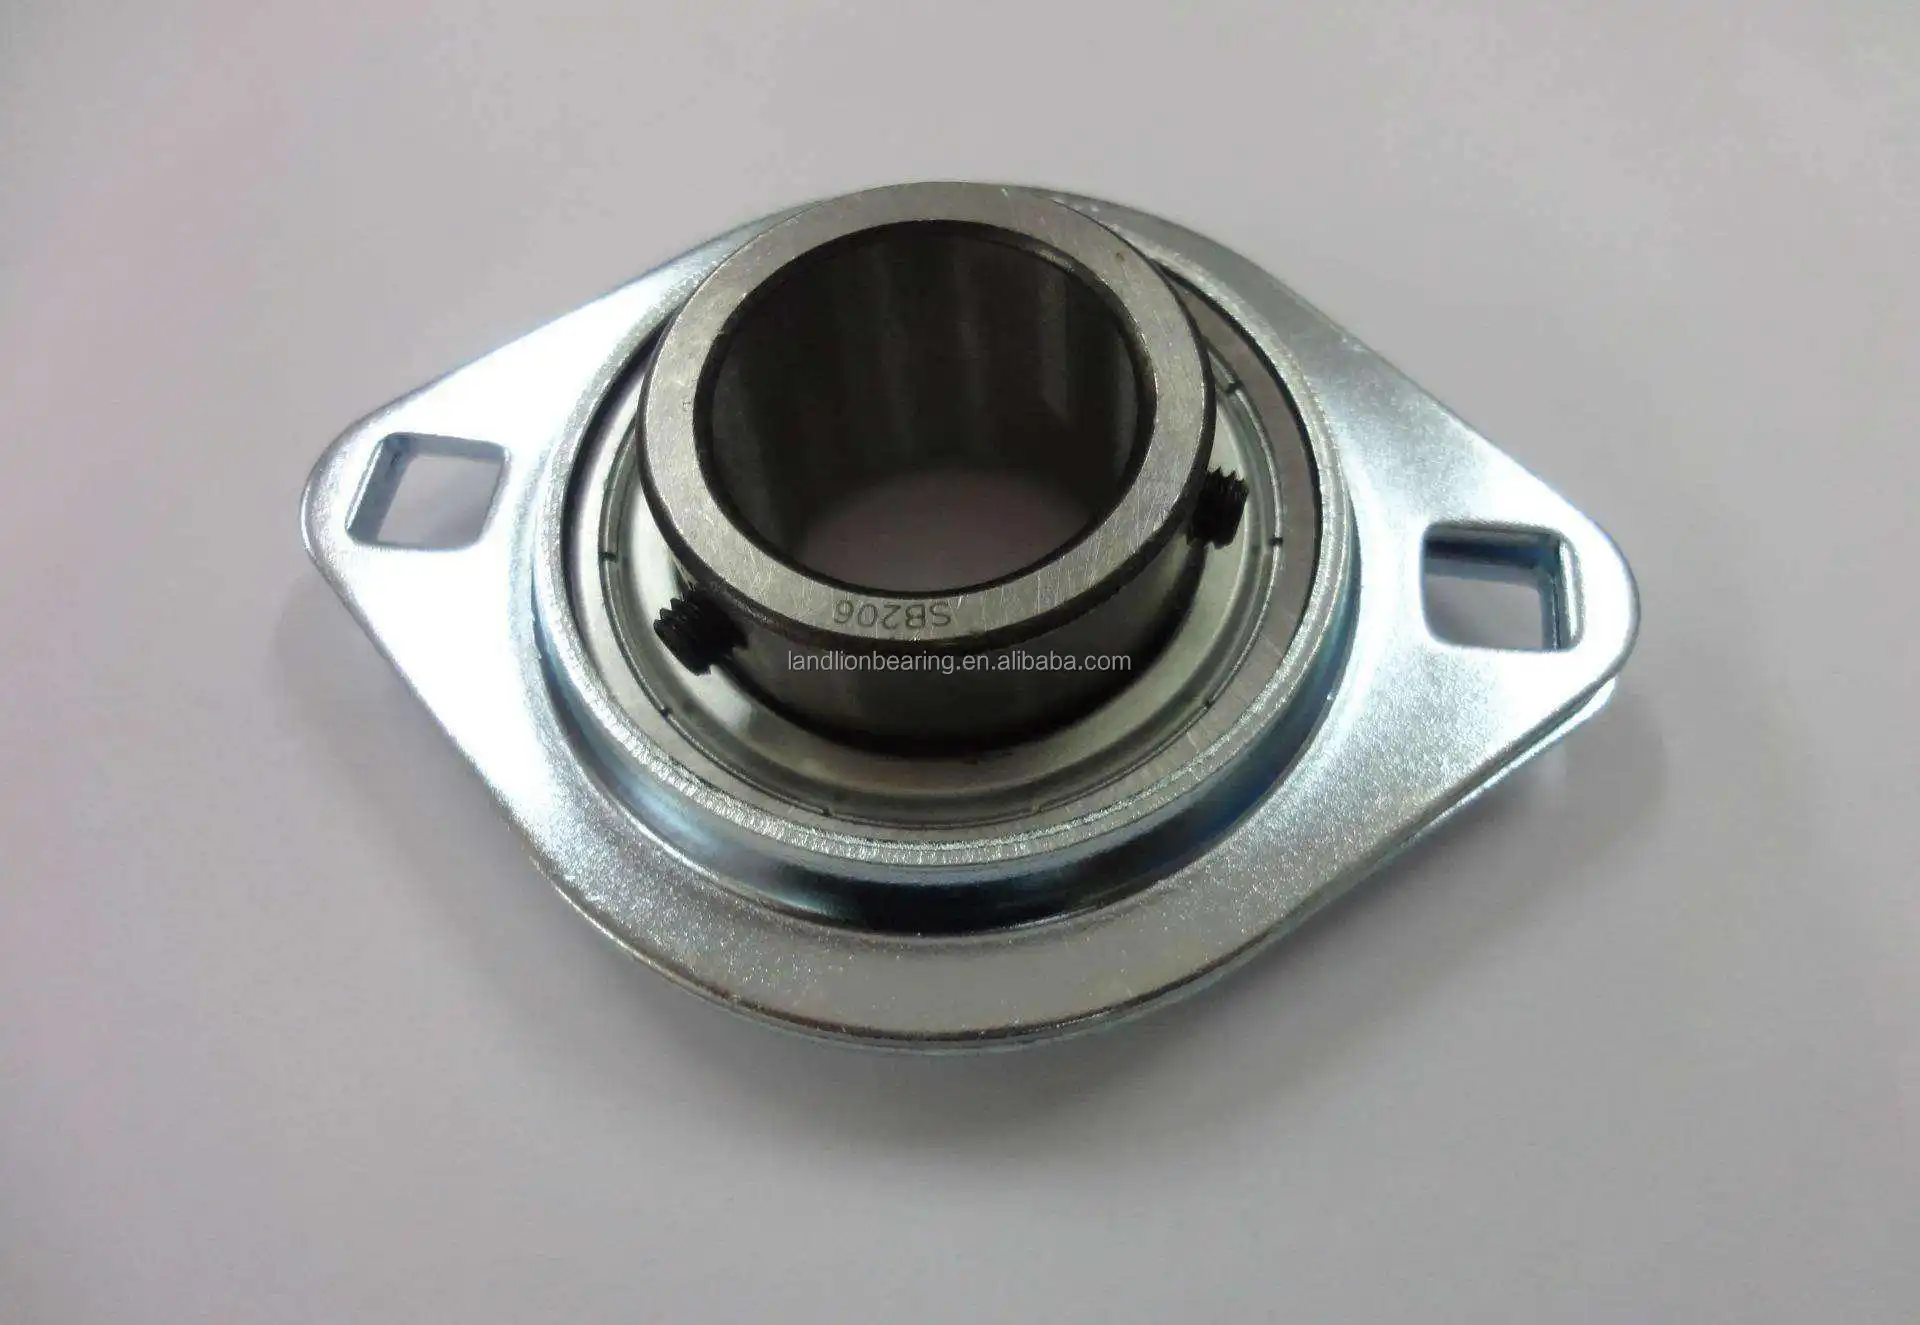 Ball Flange Bearing SSBPFL 204 bore 20mm Bearing and Two-Part housing from Stainless Steel 